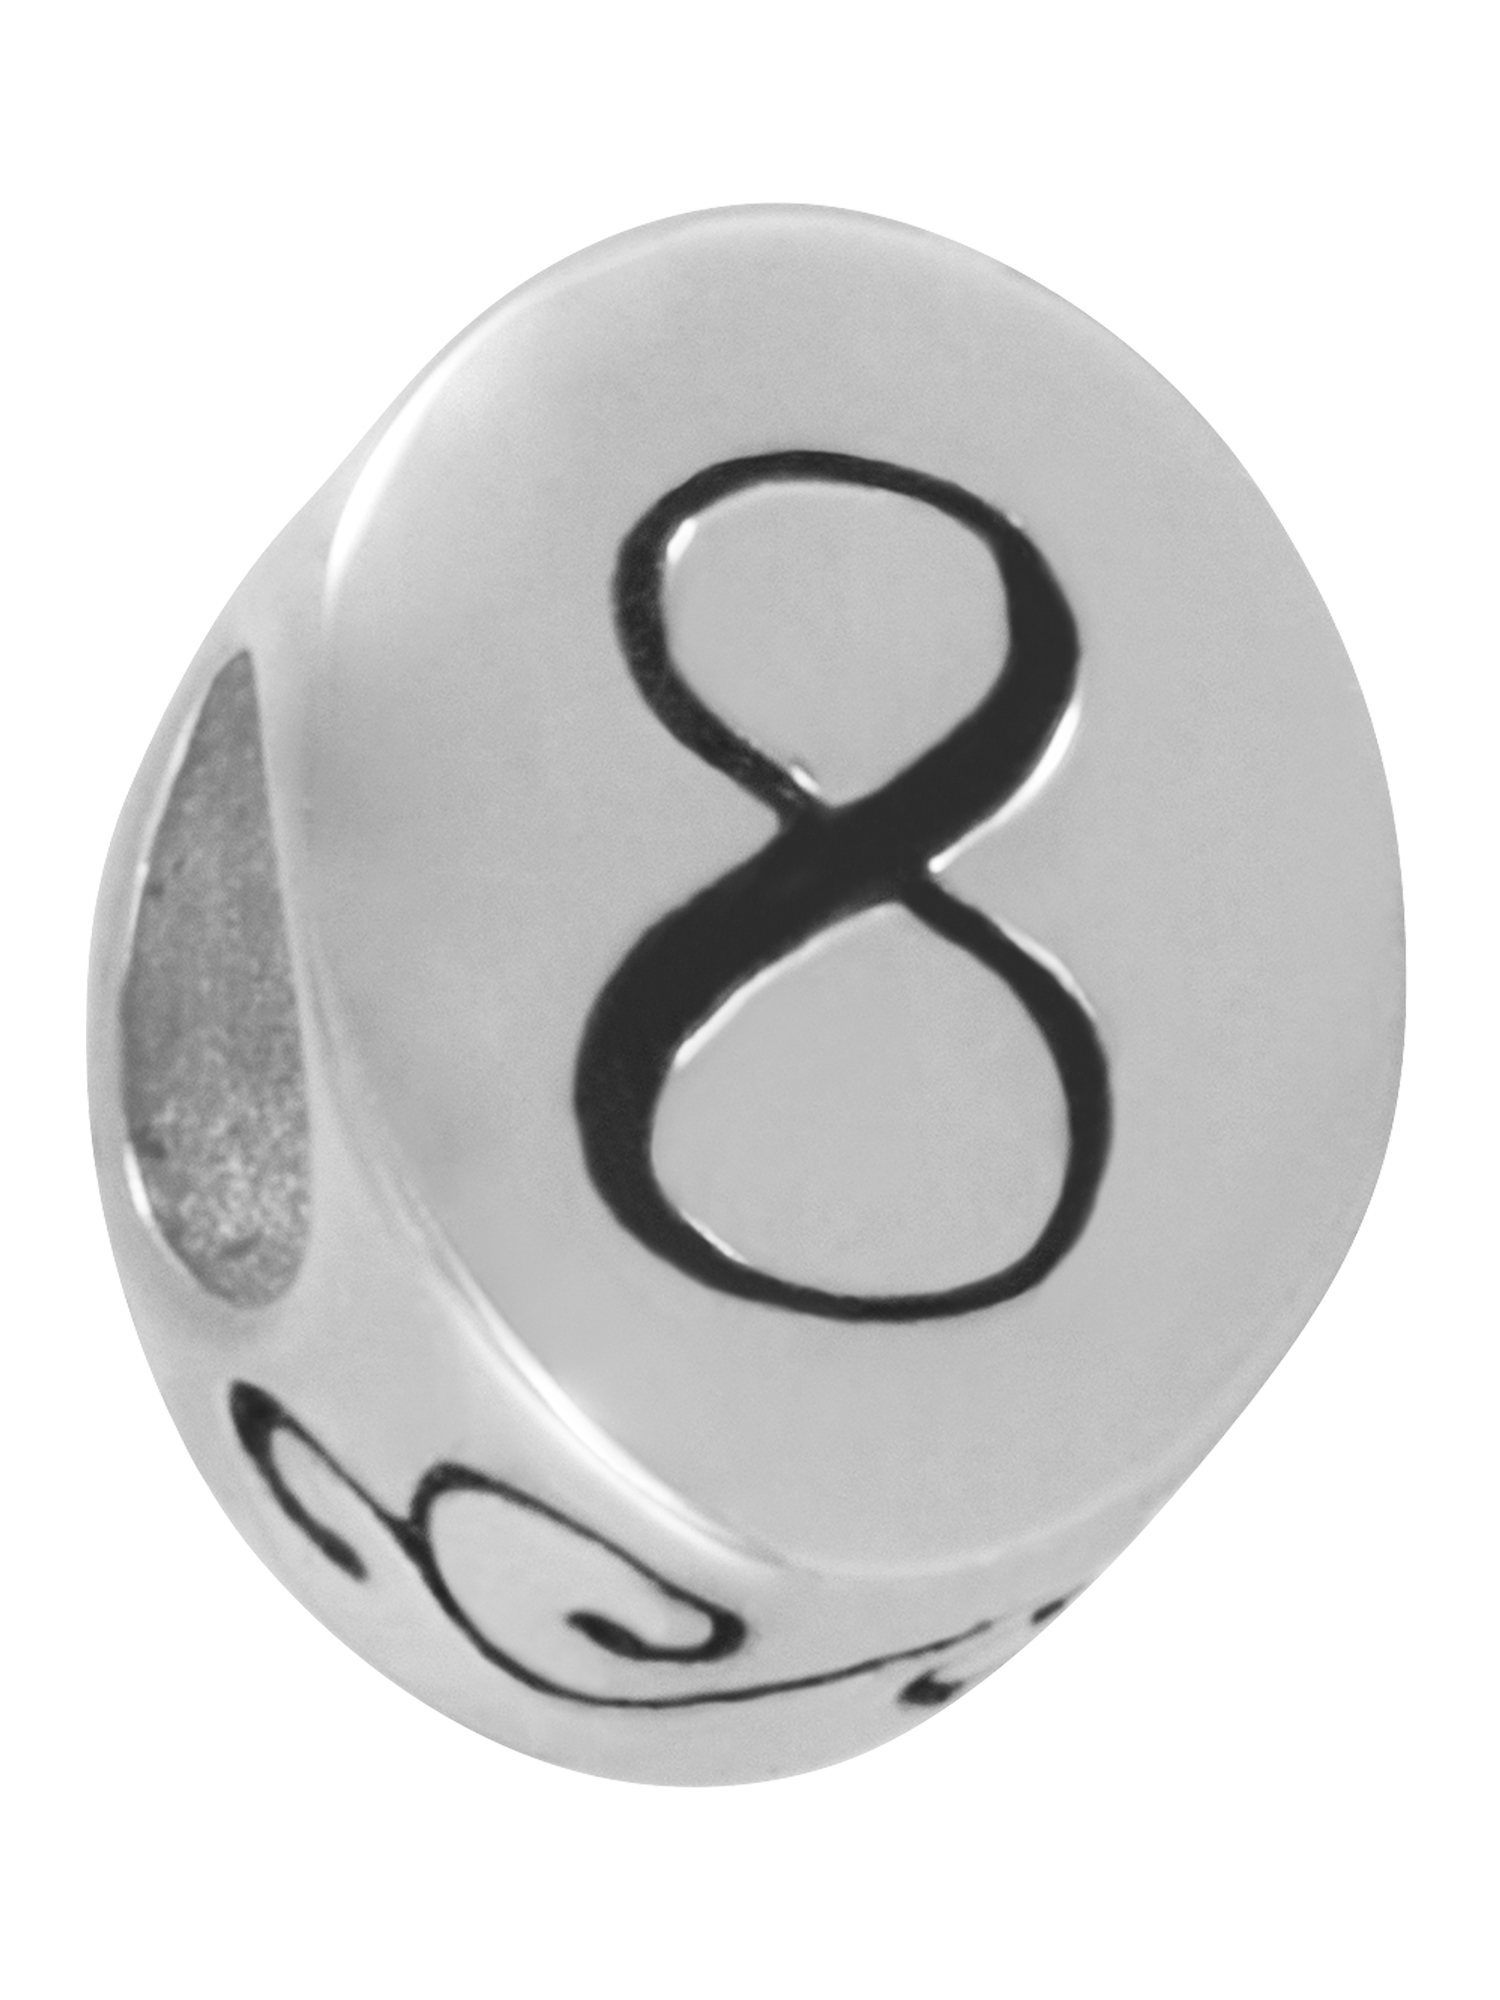 Connections from Hallmark Stainless Steel Number 8 Charm Bead - image 1 of 4